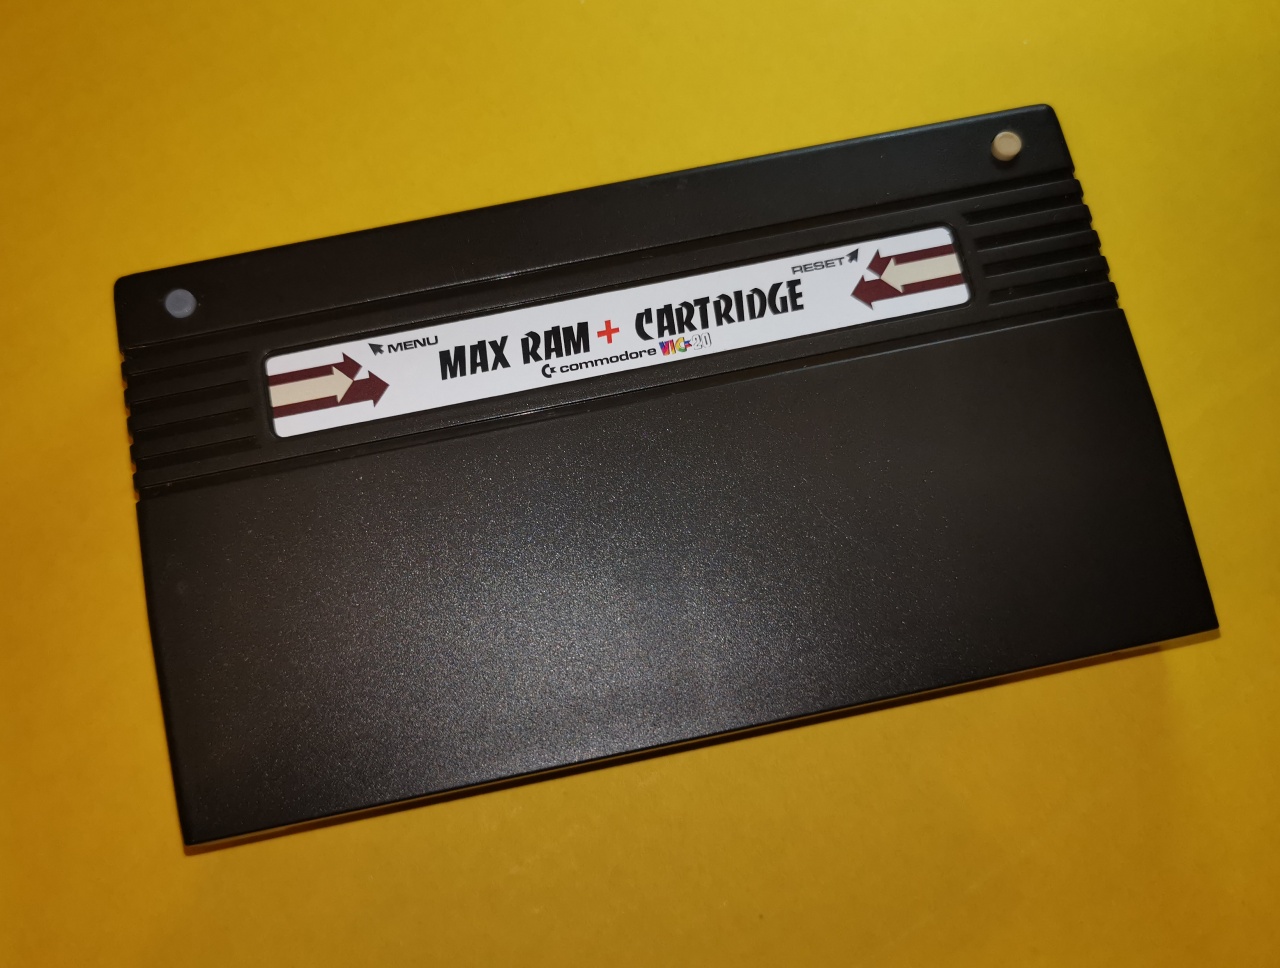 MAXRAM+ v2 Cartridge VIC20 0k 3k 8k 16k 24k 32k 35k Ram Pack for the VIC20